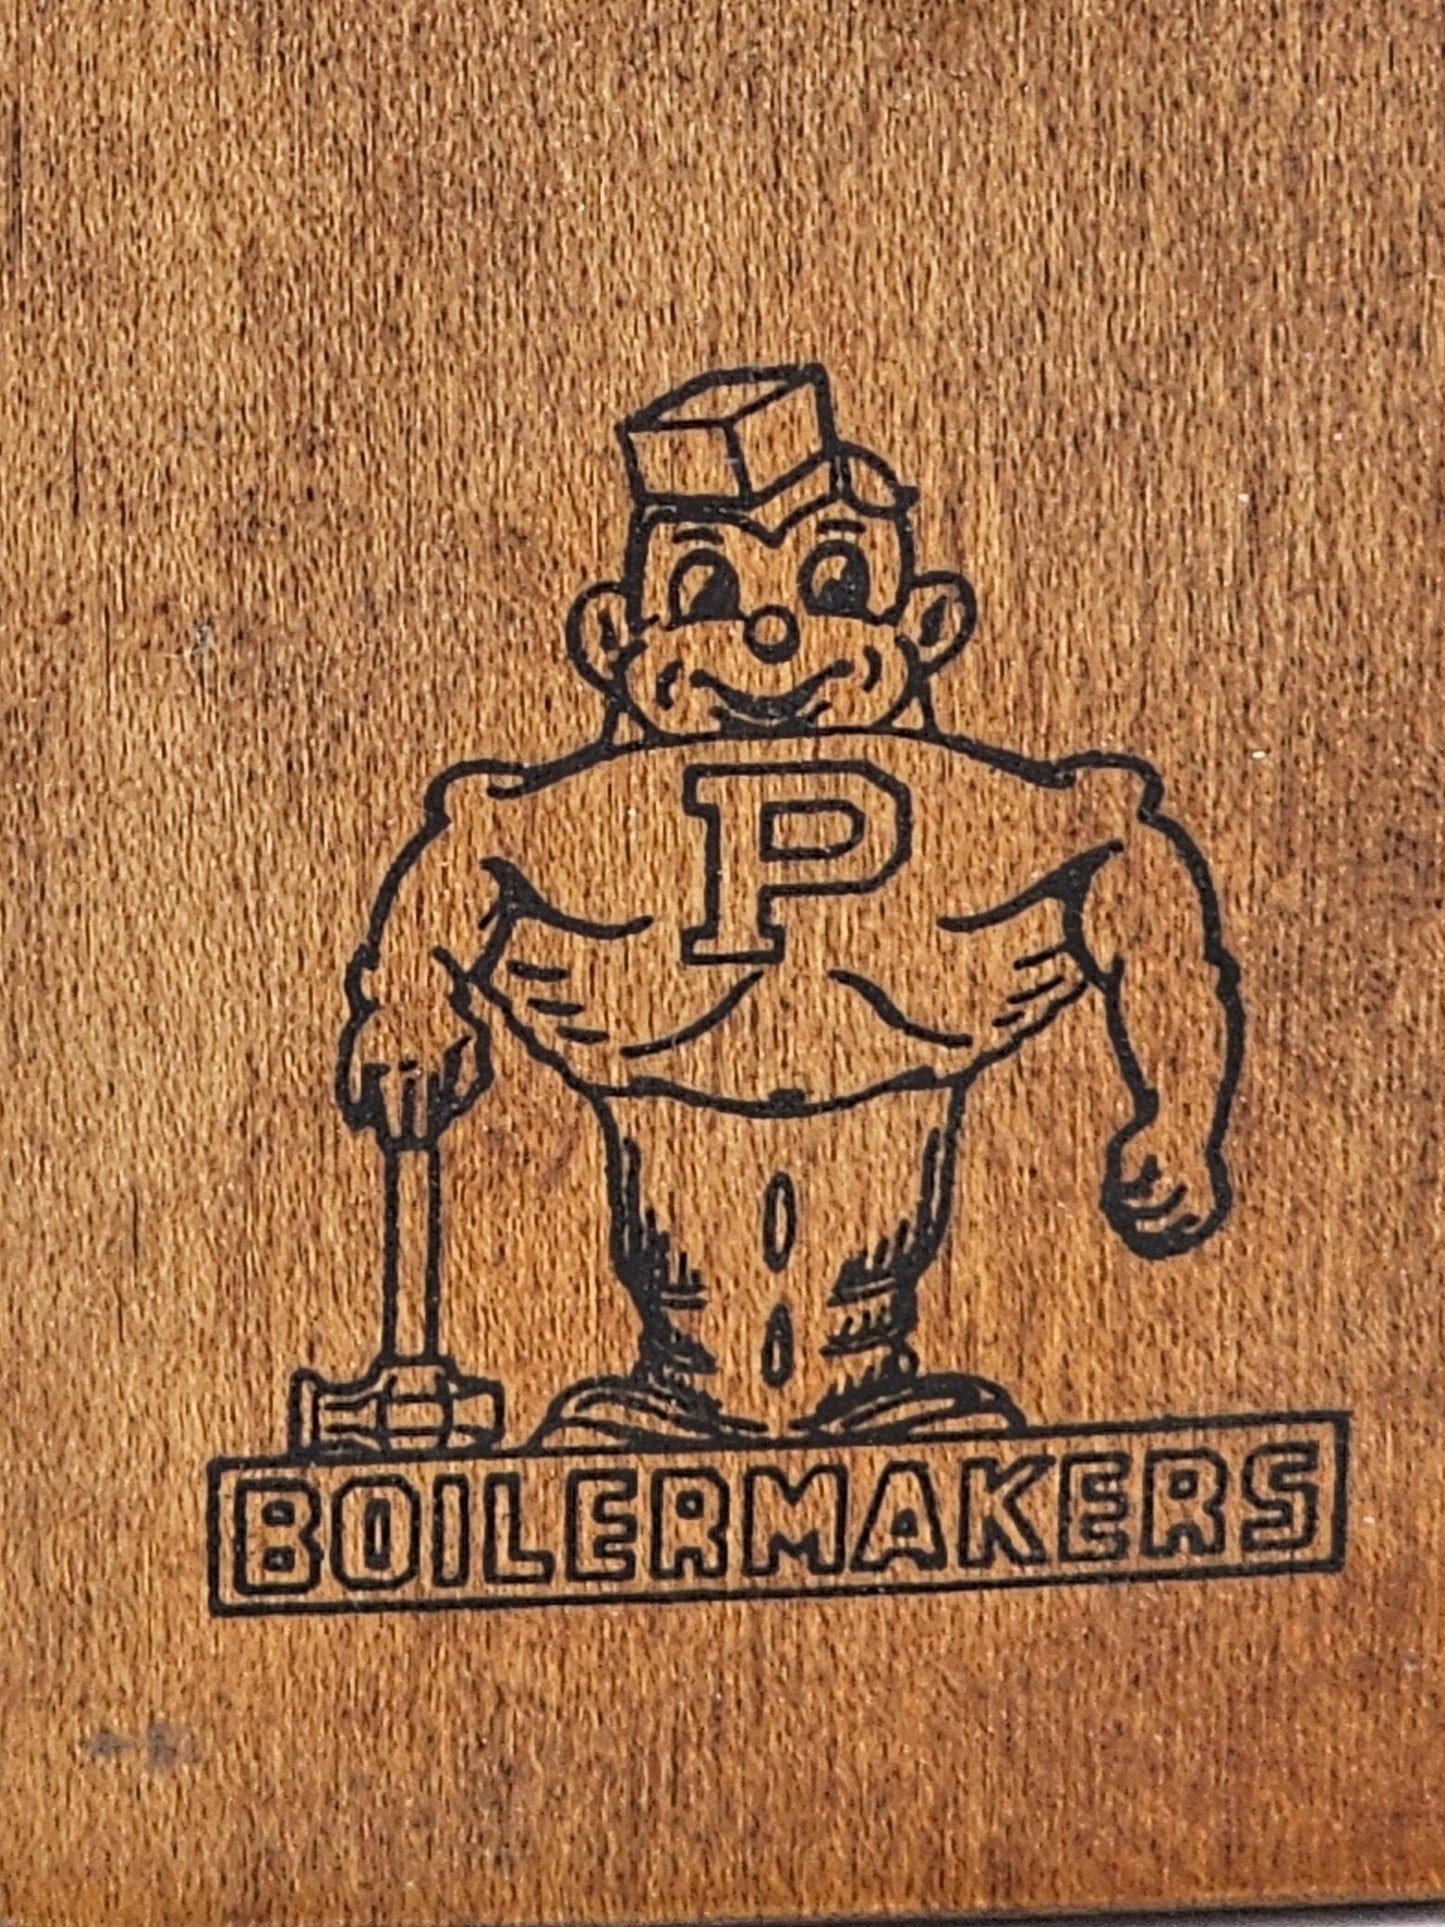 Steady Bunny Shop - Vintage Purdue University Boilermakers | 8" Wooden Paddle - University Relic - Steady Bunny Shop